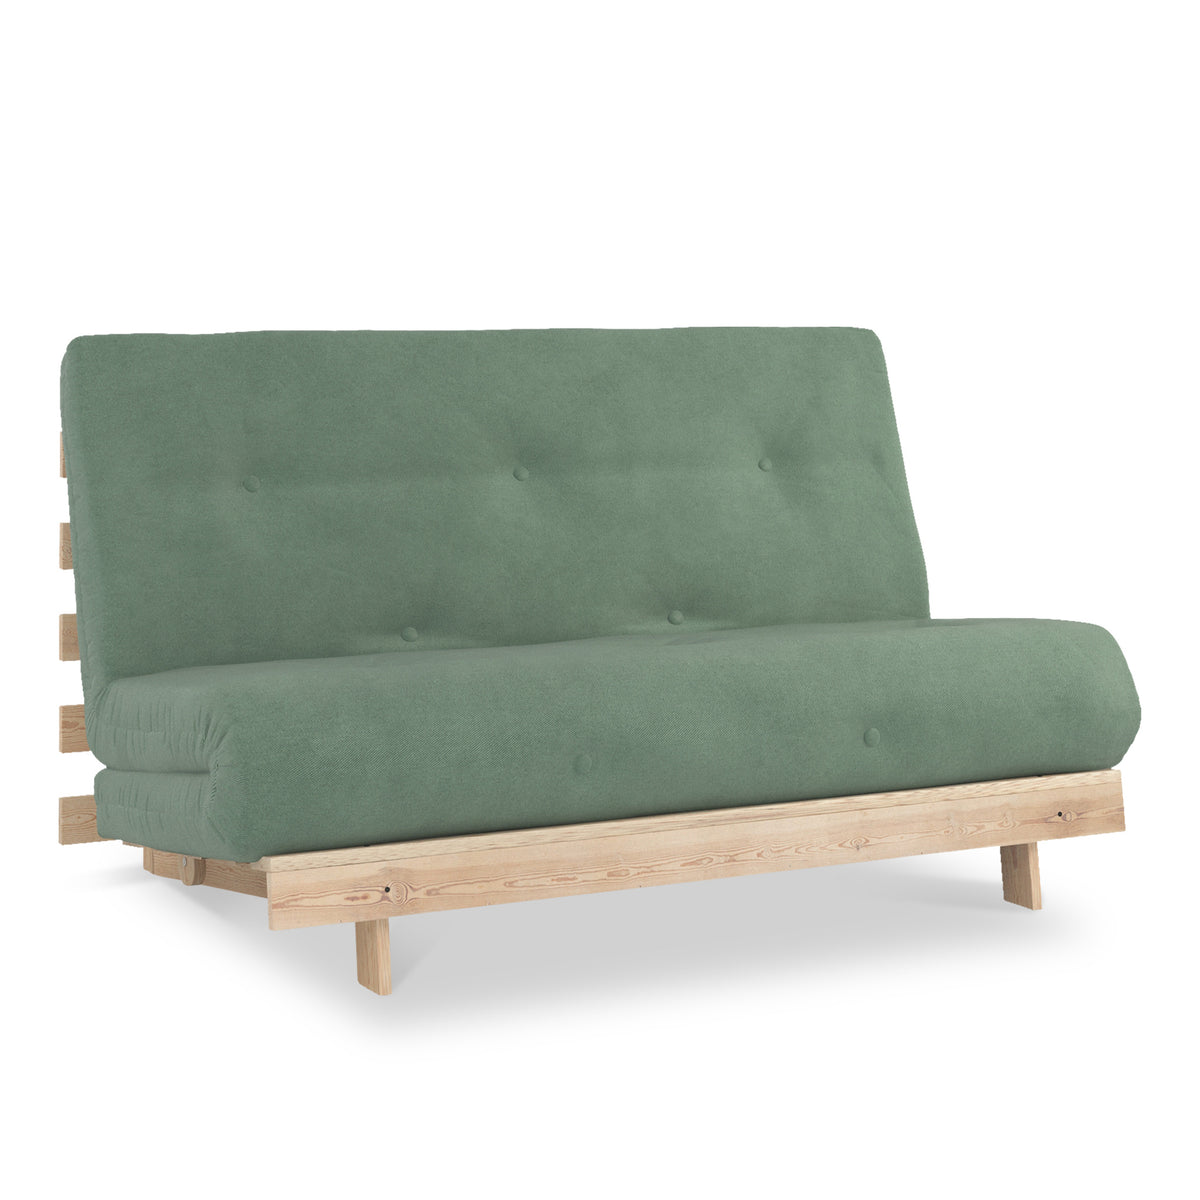 Maggie Harmony Green Double Futon Sofa Bed from Roseland Furniture